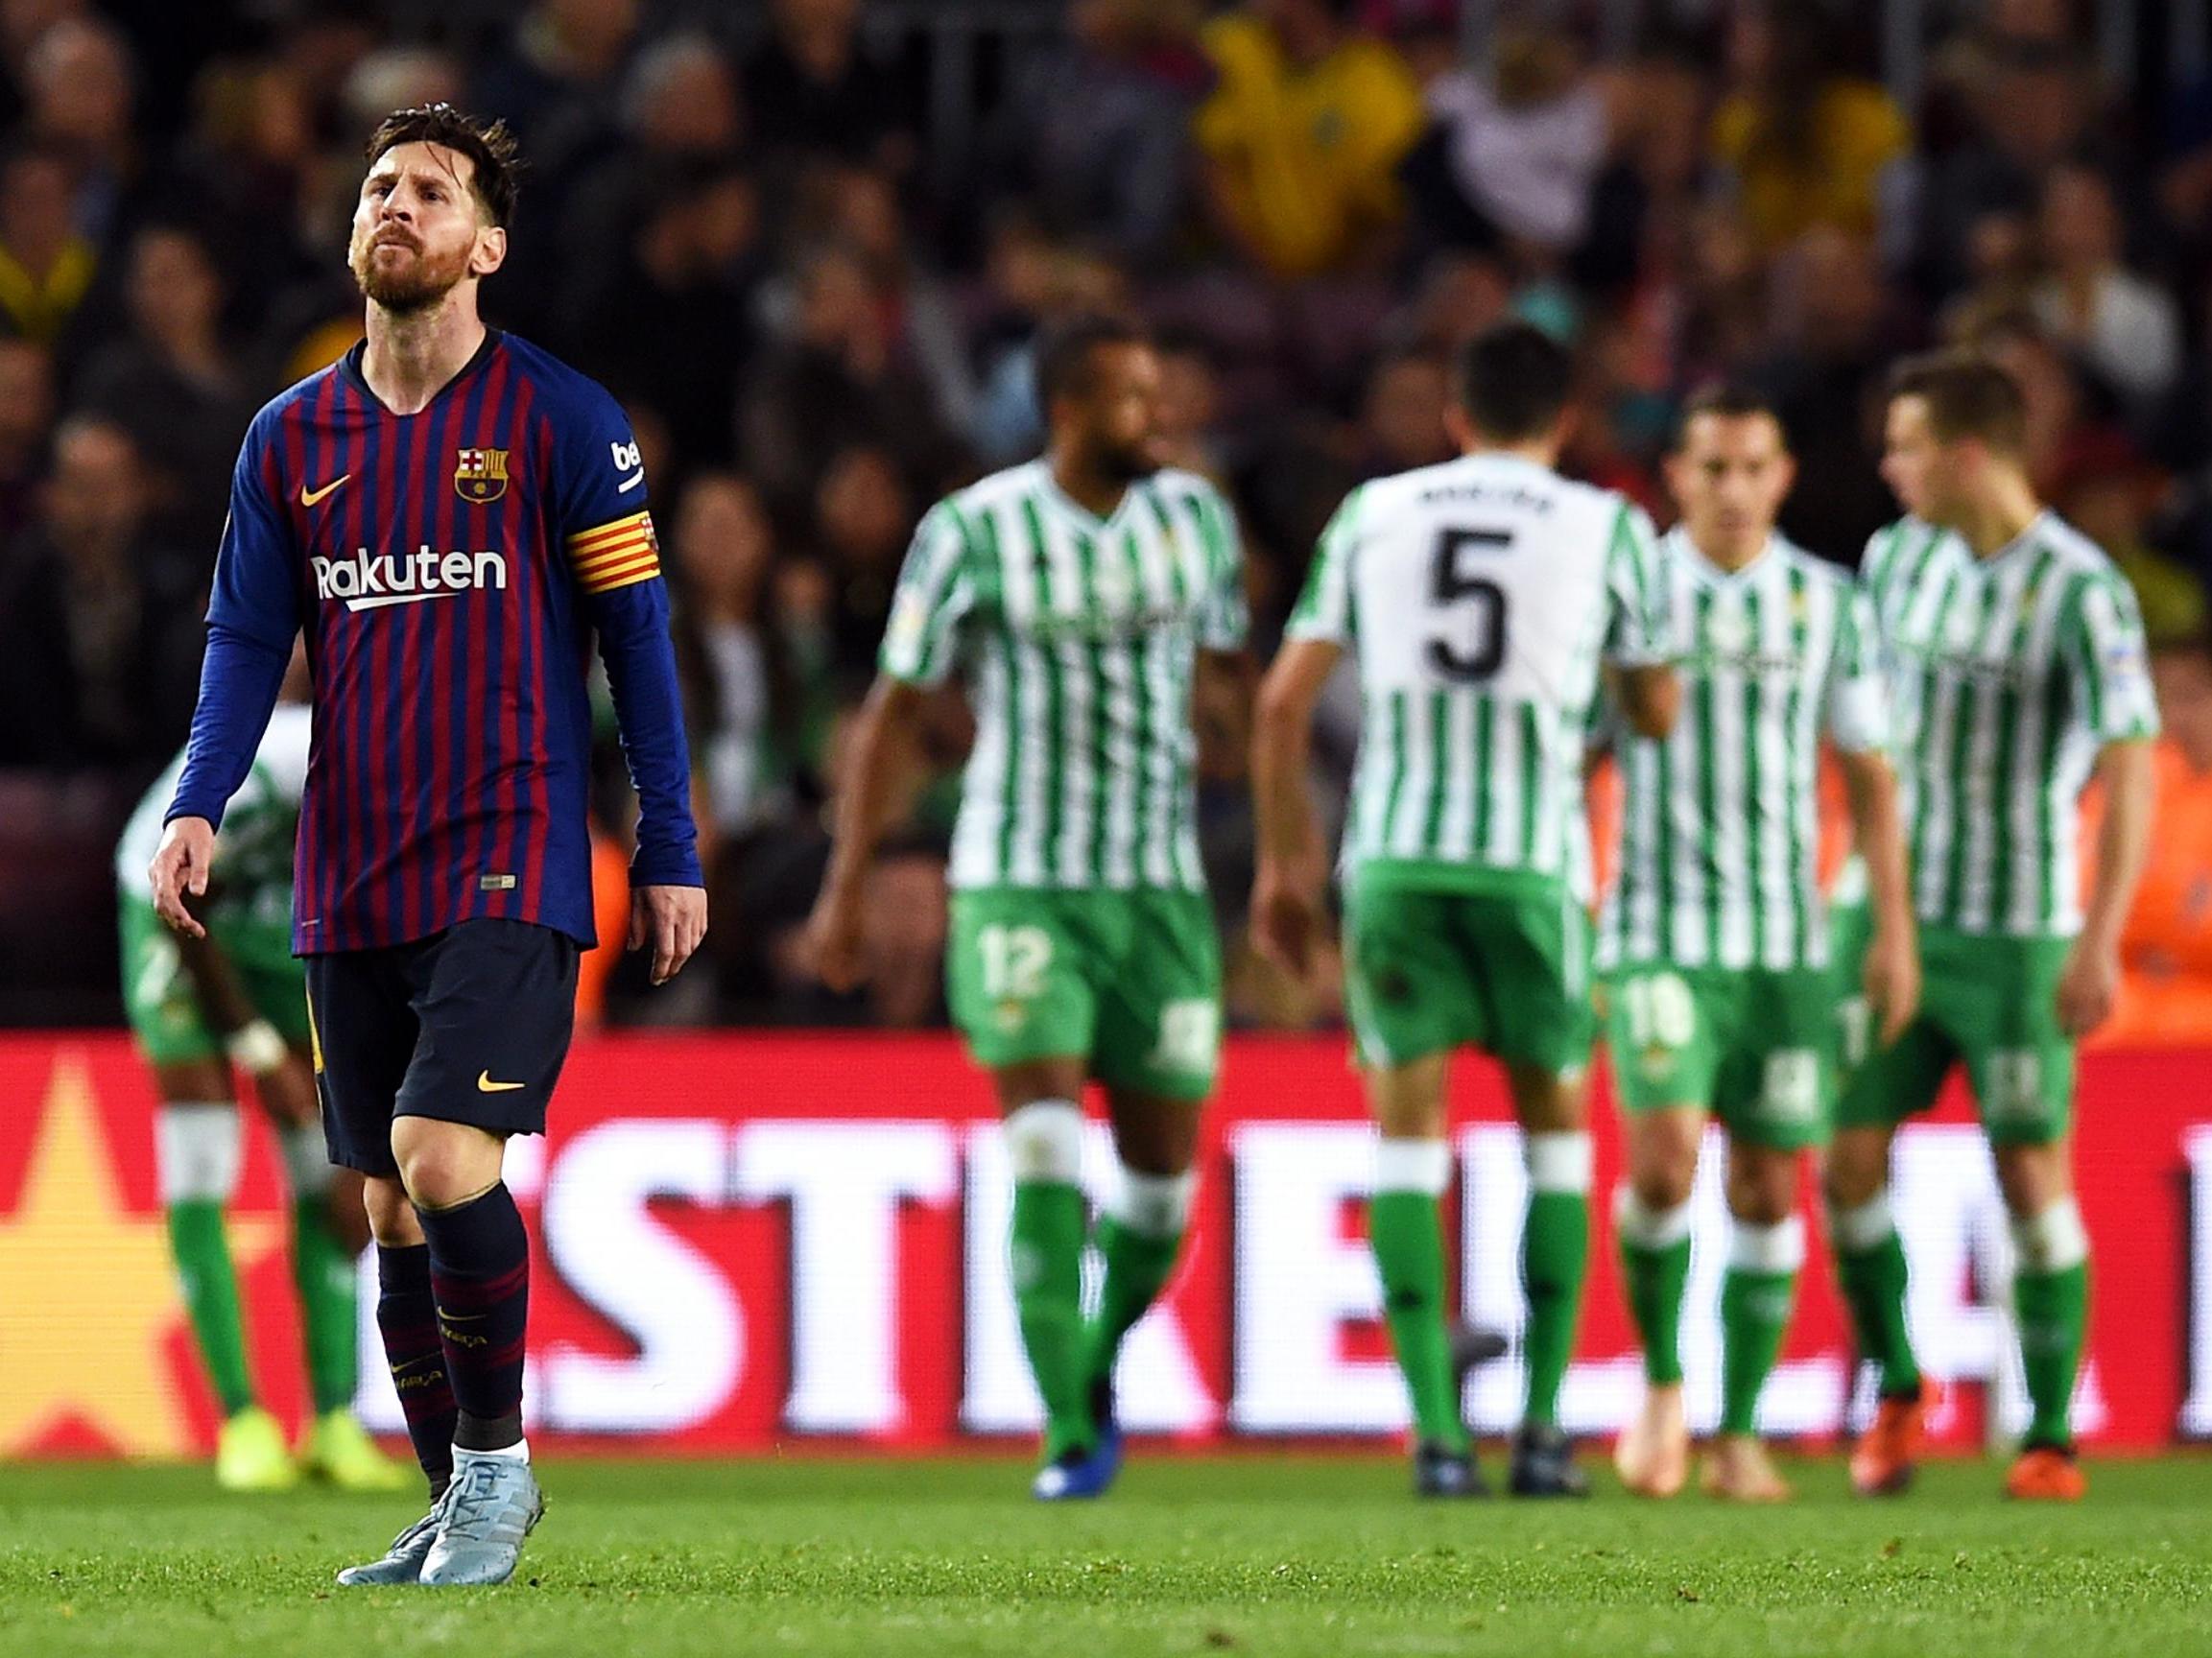 Barcelona vs Real Betis LIVE - Lionel Messi scores twice but Barca